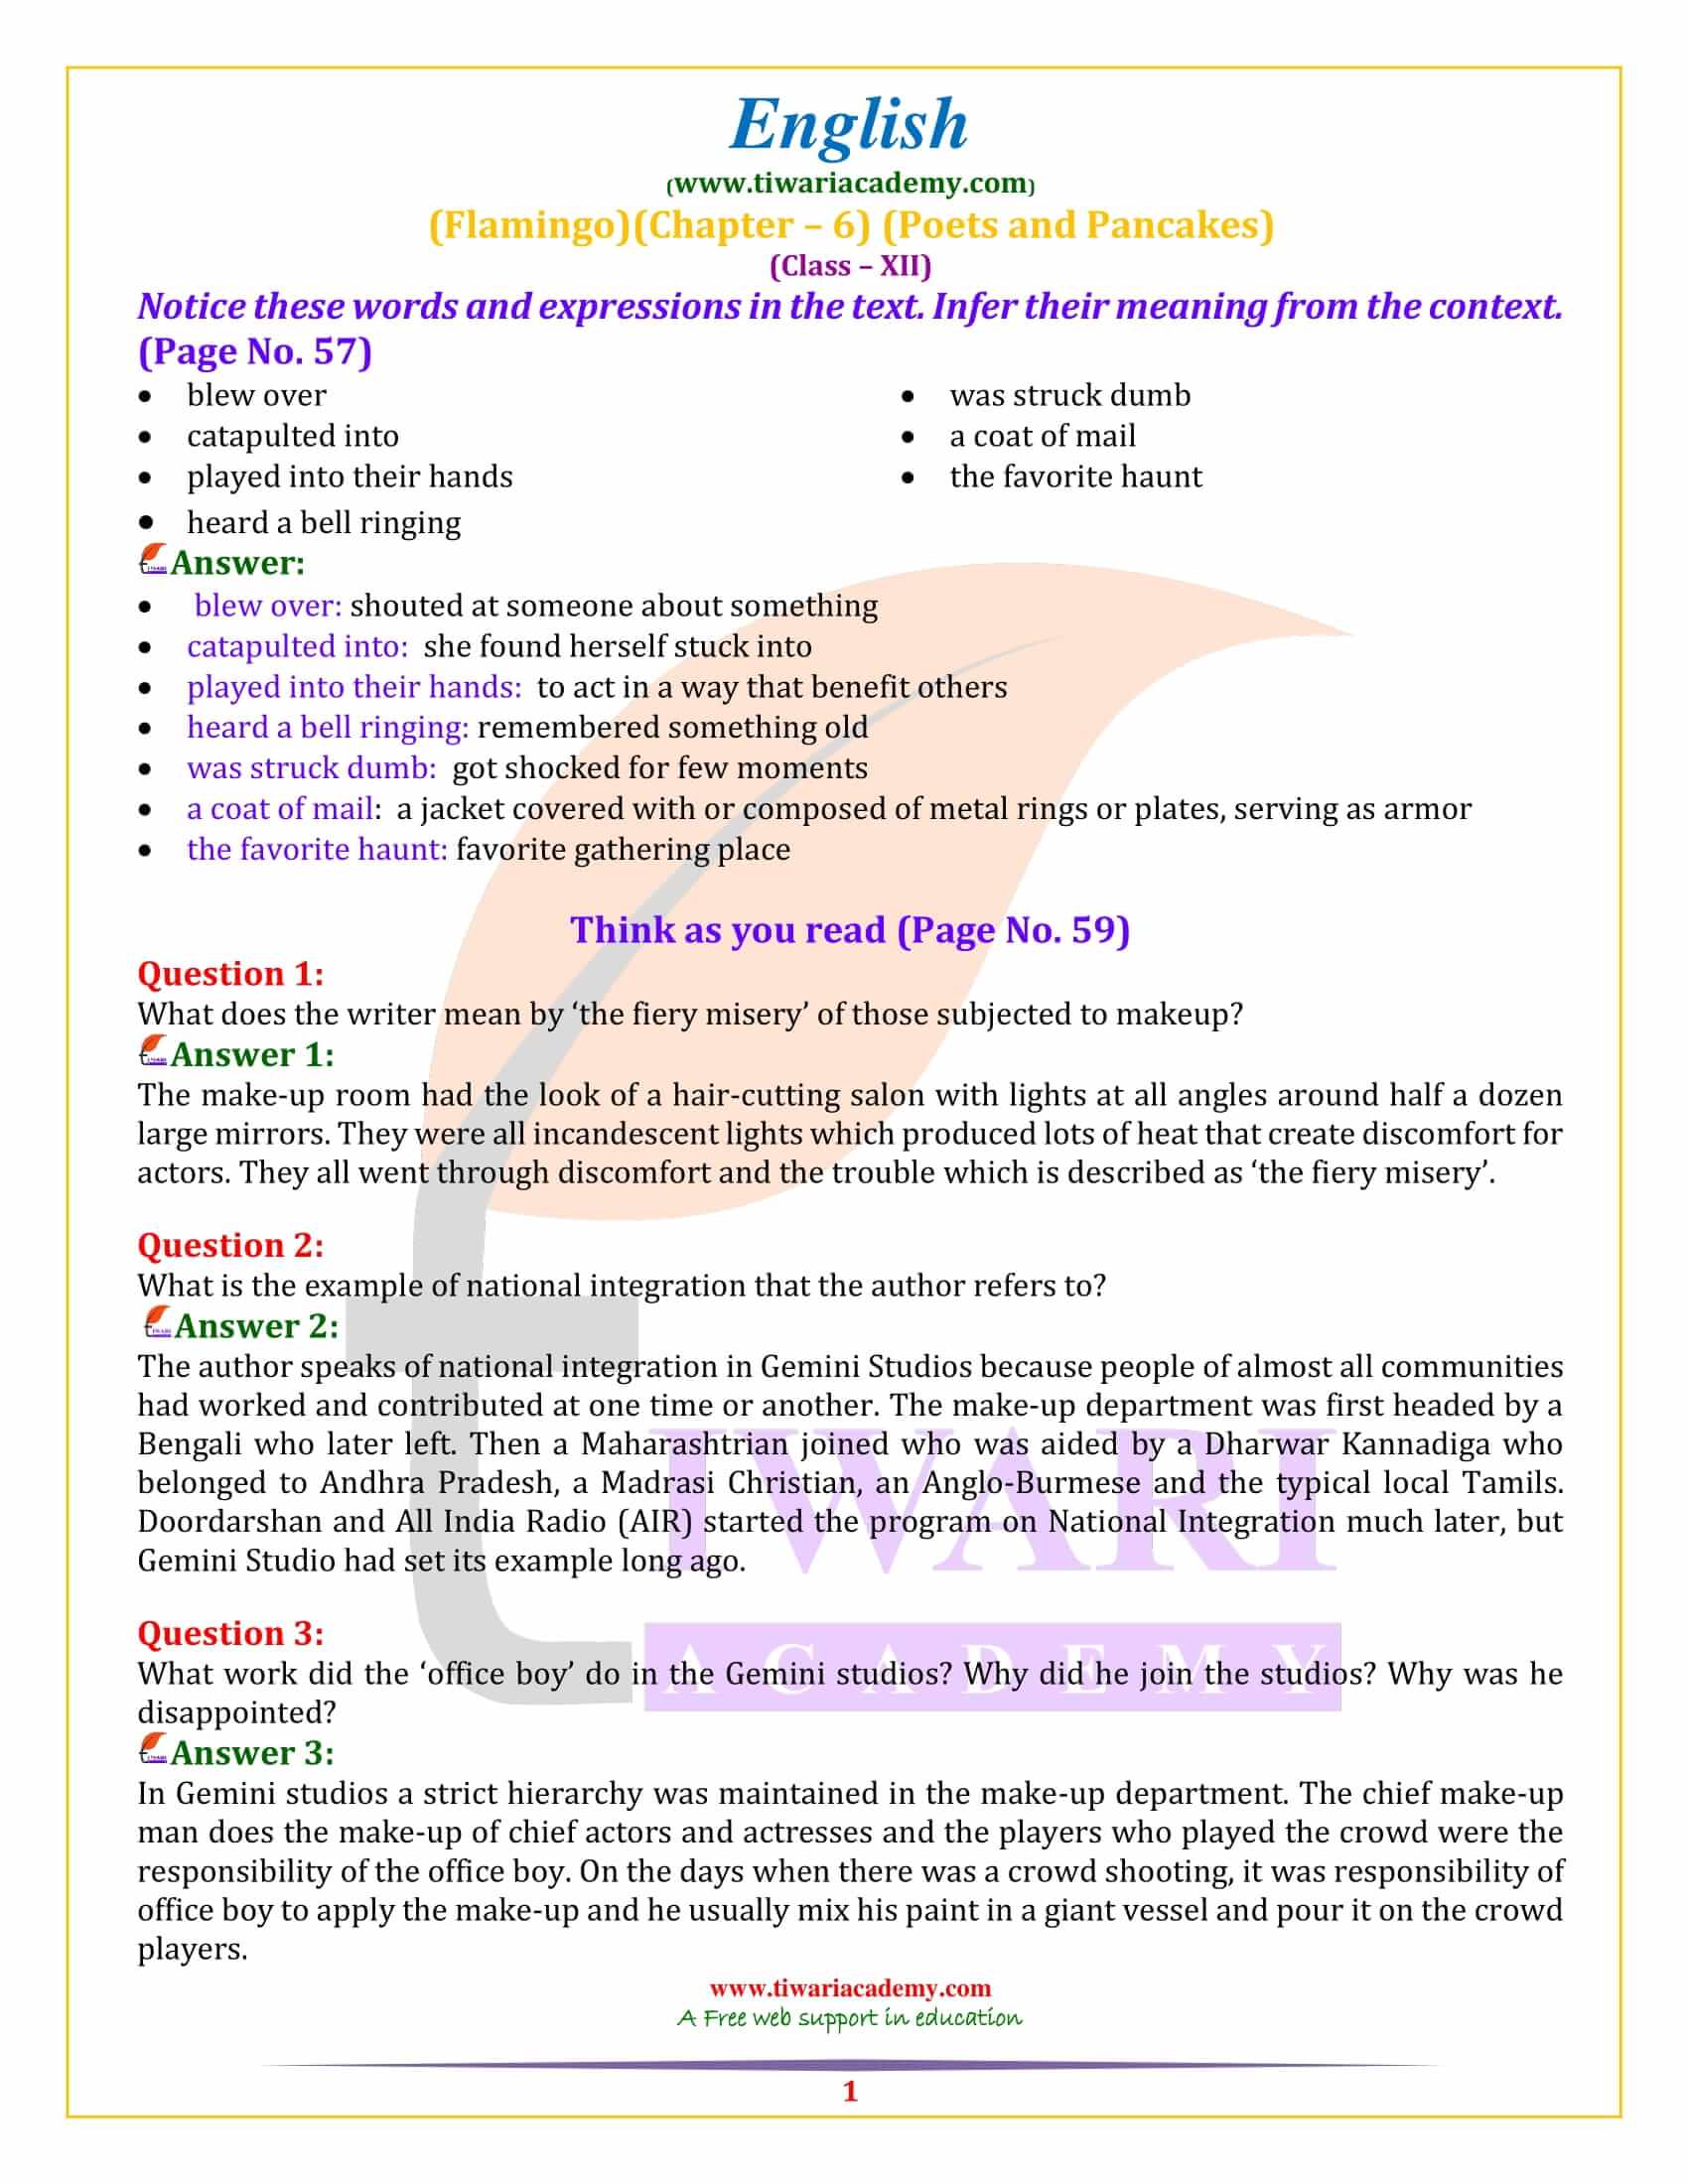 NCERT Solutions for Class 12 English Chapter 6 Poets and Pancakes